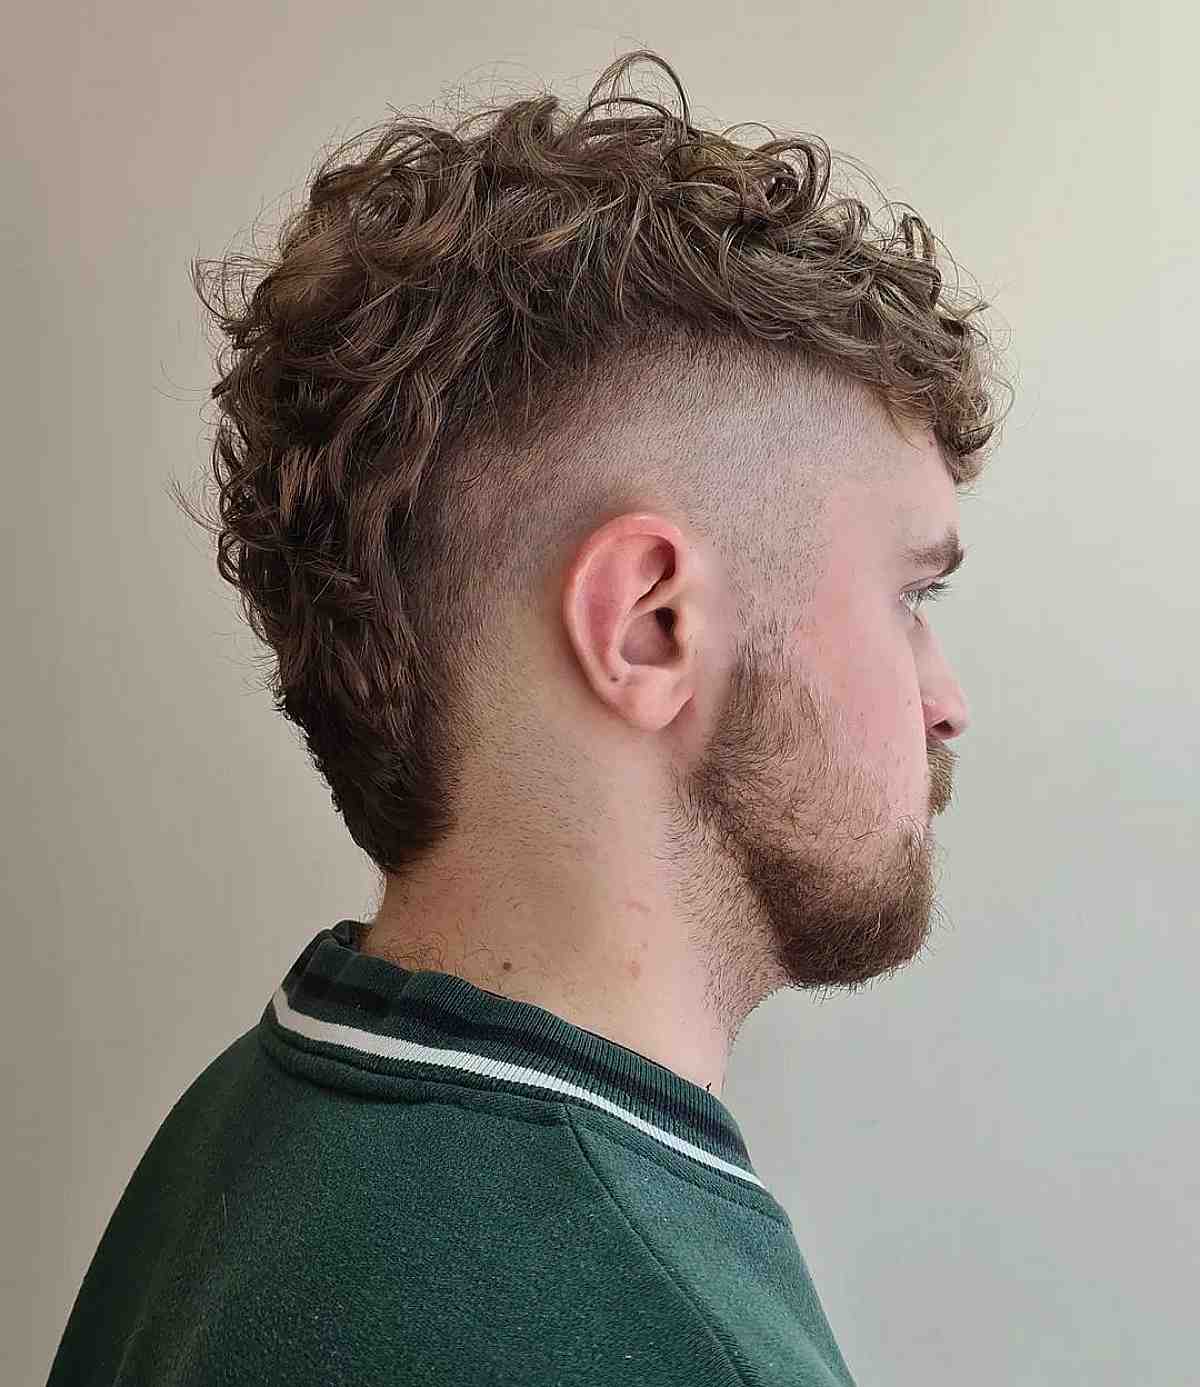 35 Cool Curly Undercut Hairstyles For Men That Are Trending